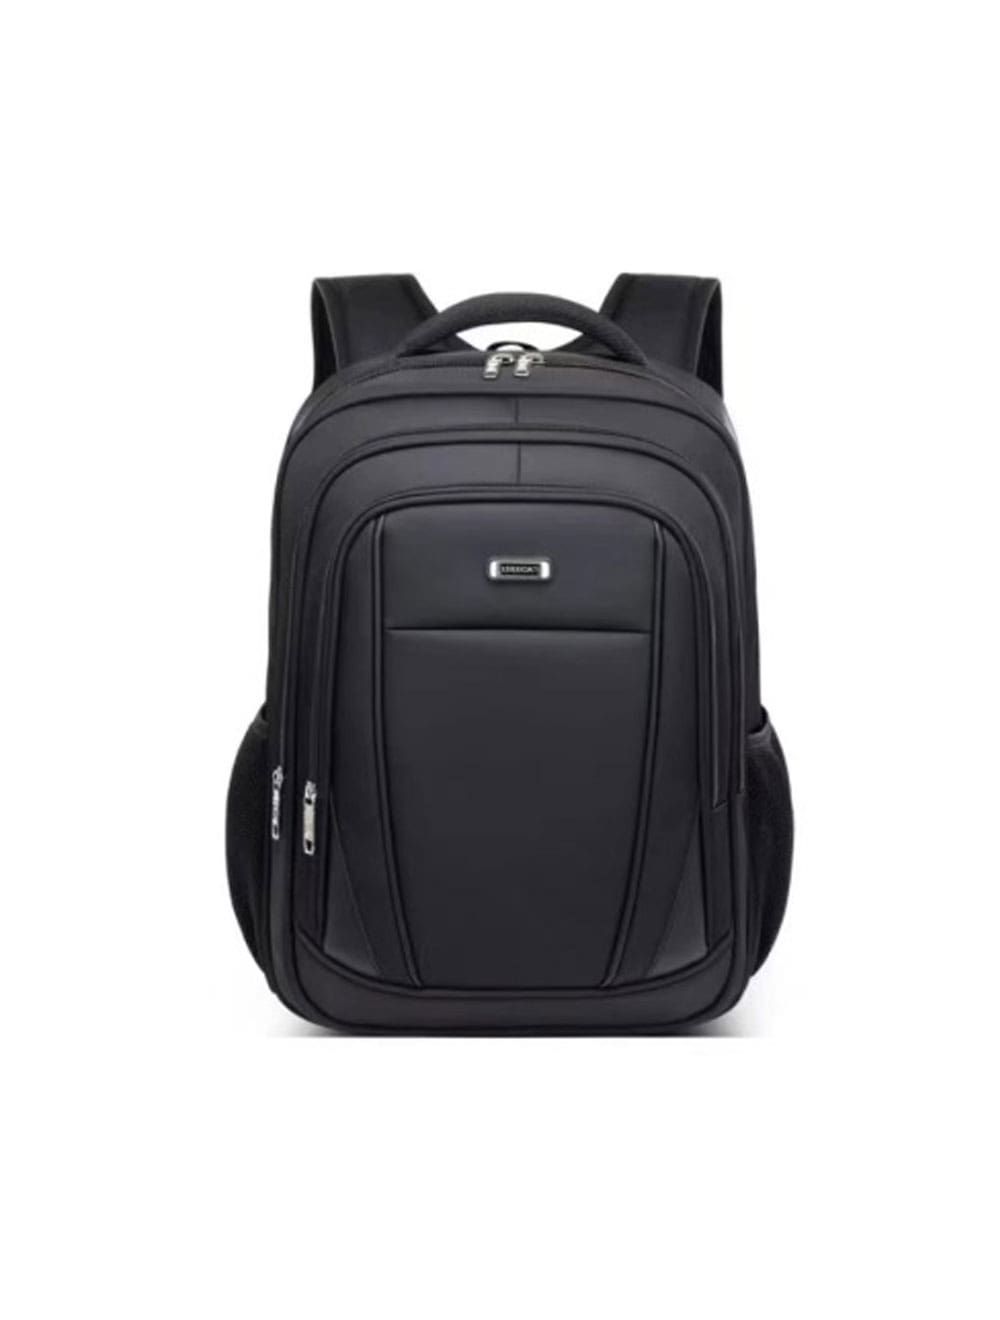 Laptop Backpack fits up to 15.6 - Black LD-1